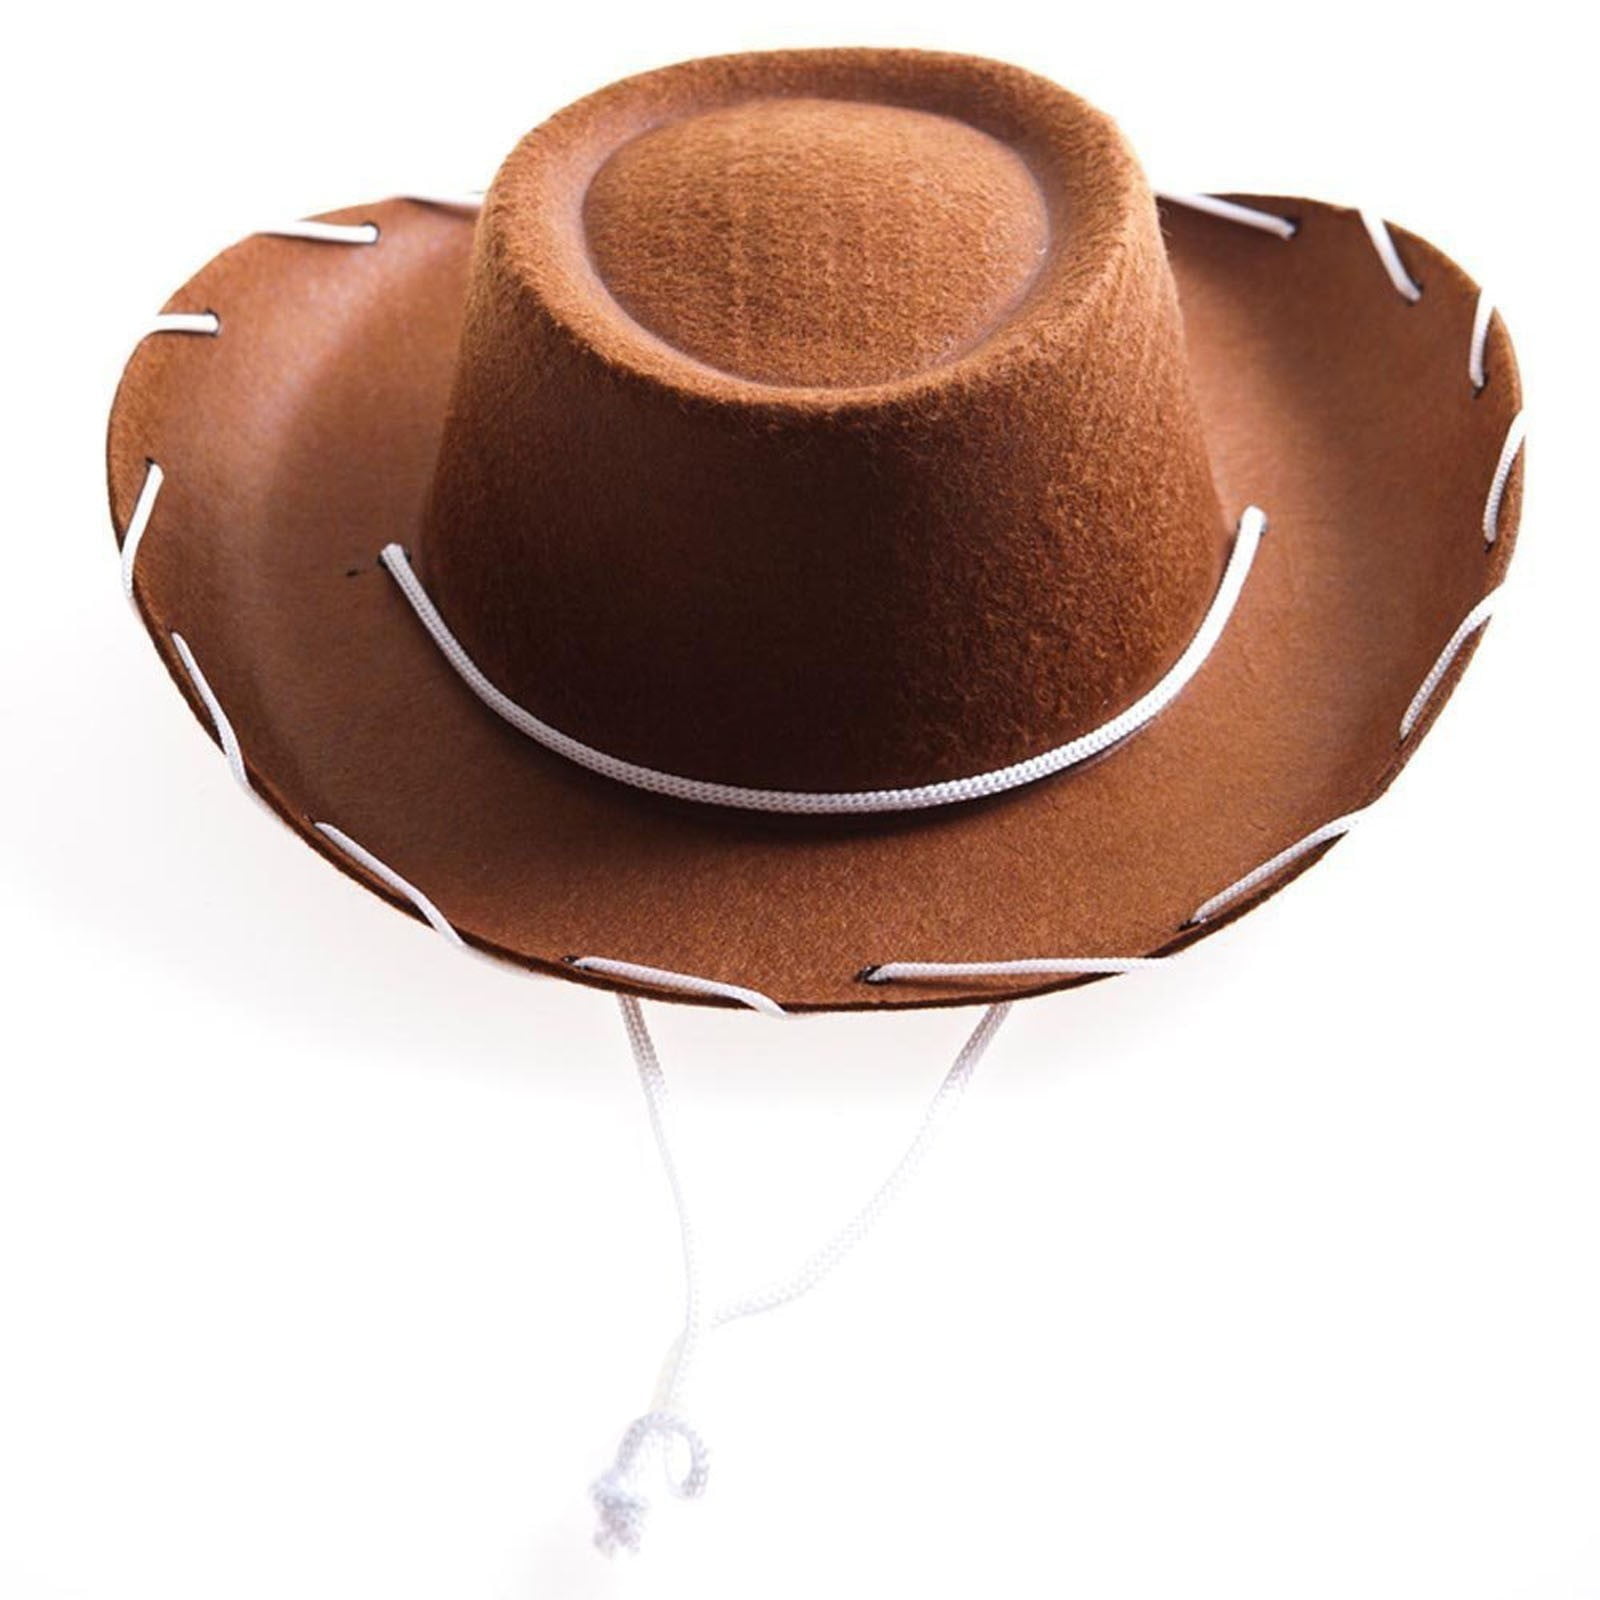 Cow Boy Costume Prop for Kids Cowboy Costume Hat with Chinstrap and Sunburst Pendant ArtCreativity Straw Cowboy Hat for Teens and Adults and Country Concerts Dress Up Parties 1PC